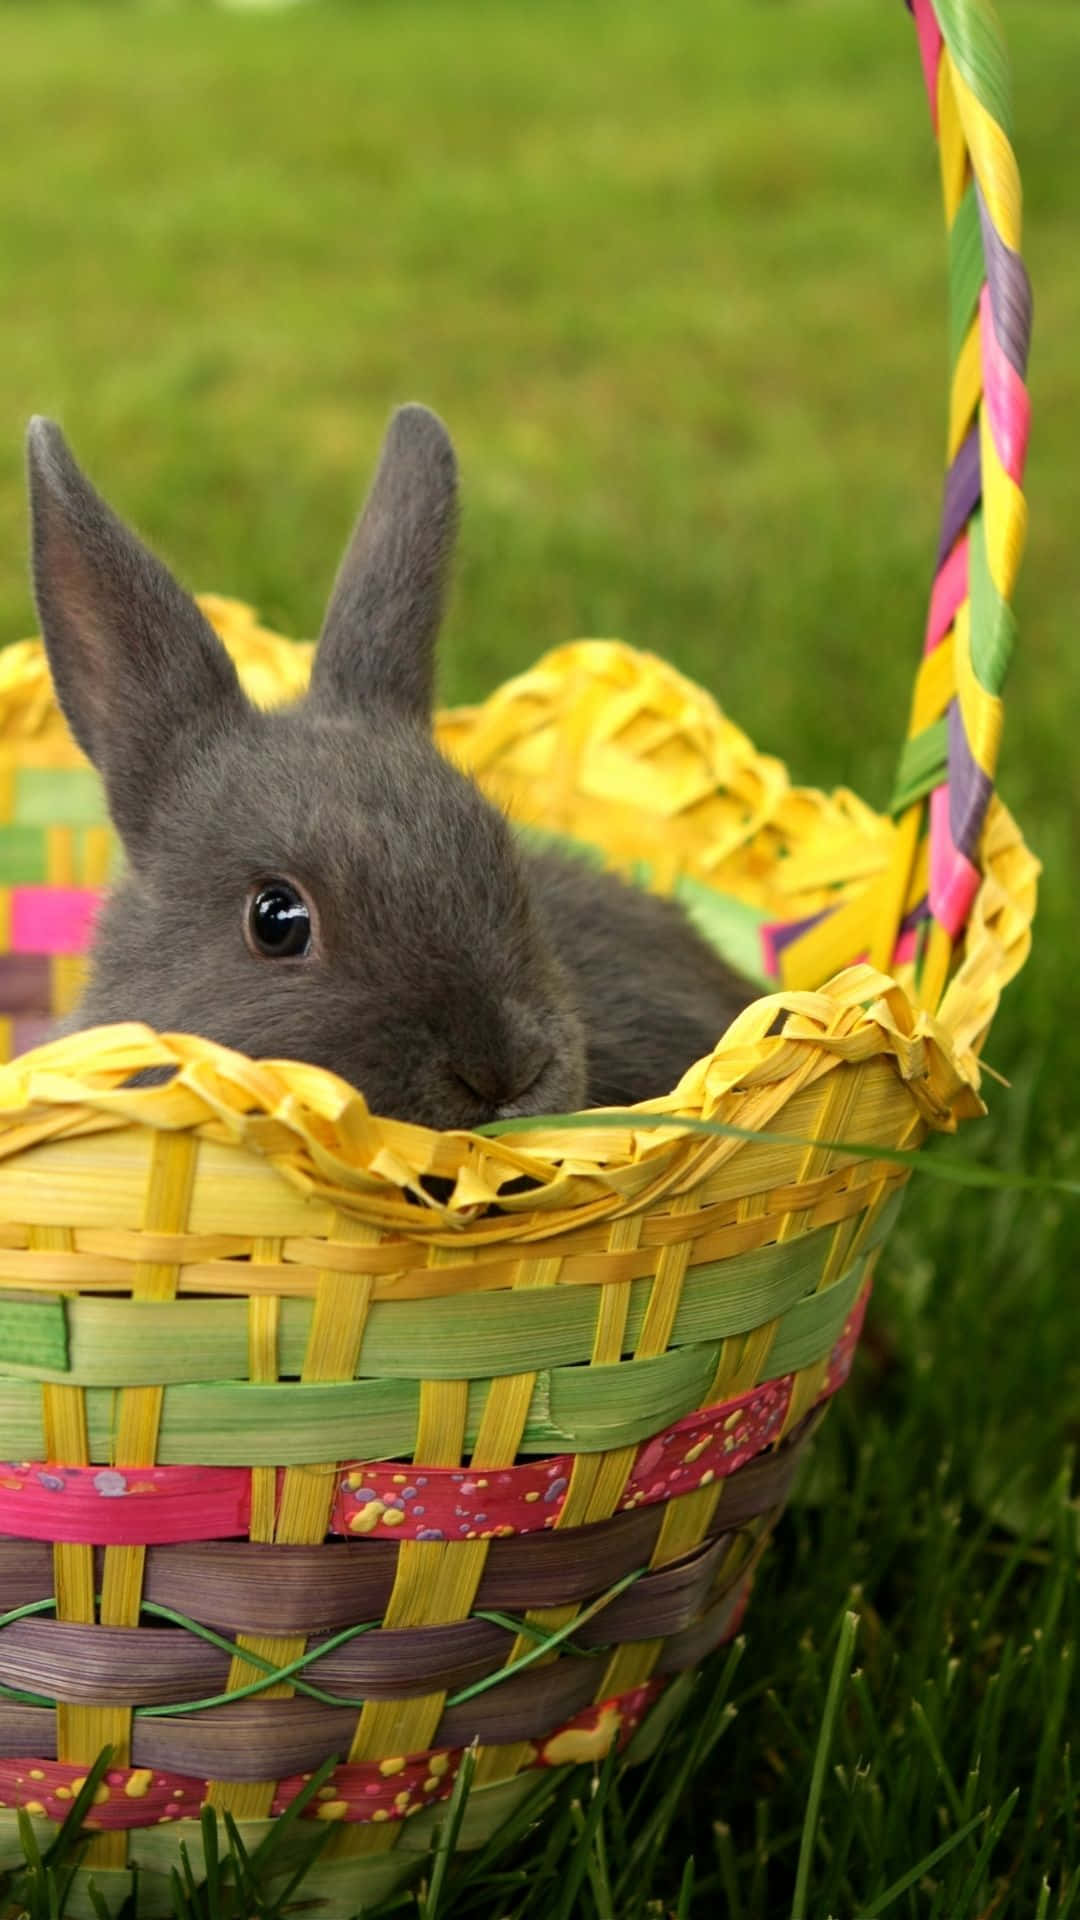 An Easter Bunny Hops By With Easter Eggs In Tow